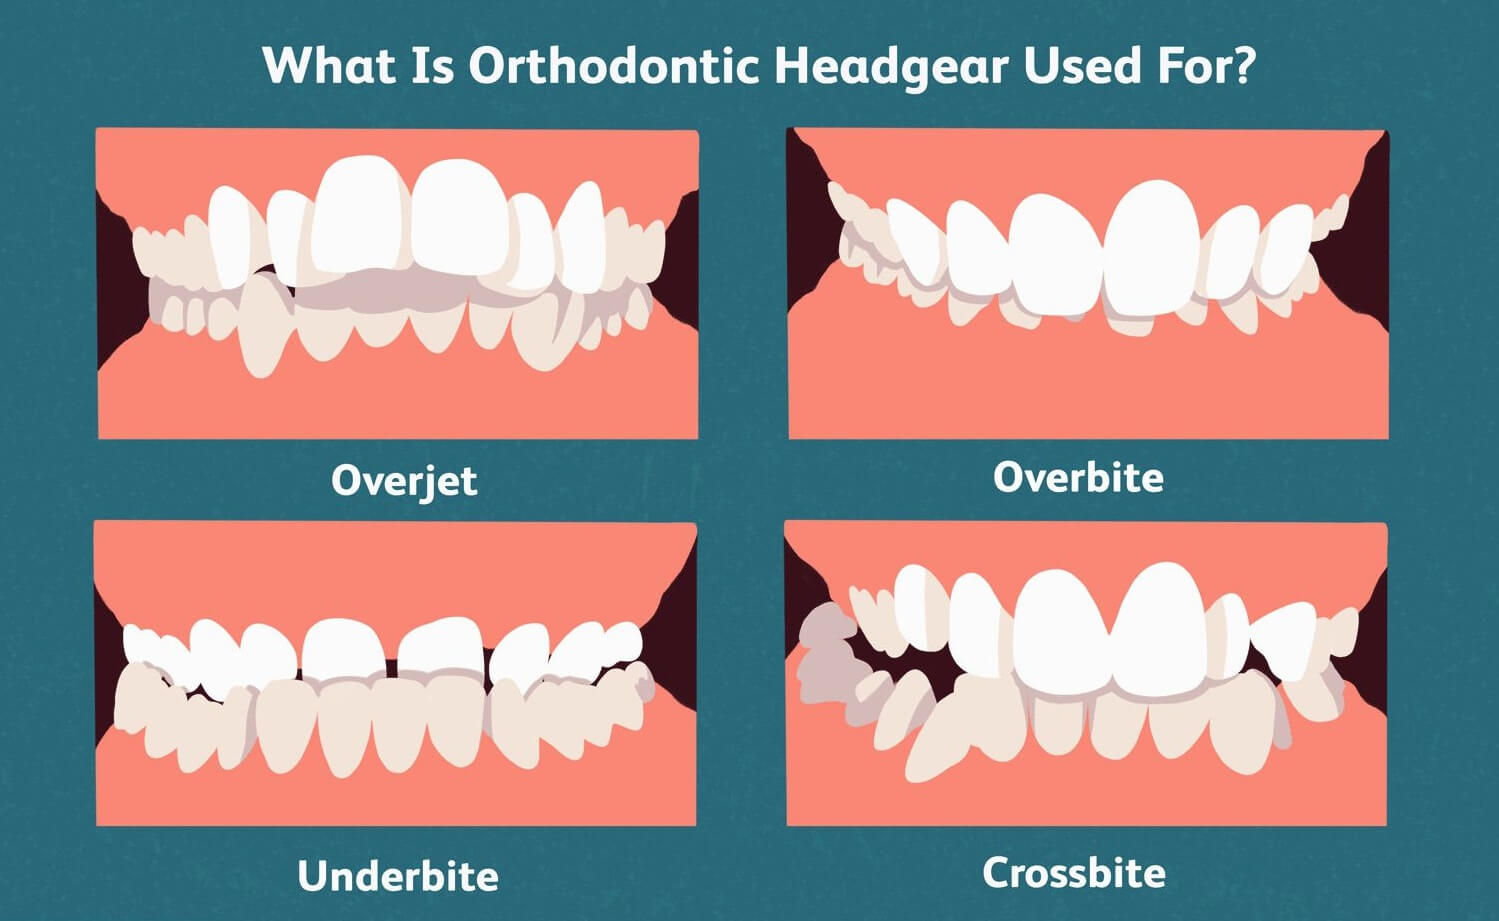 What Is Orthodontic Headgear Used For?